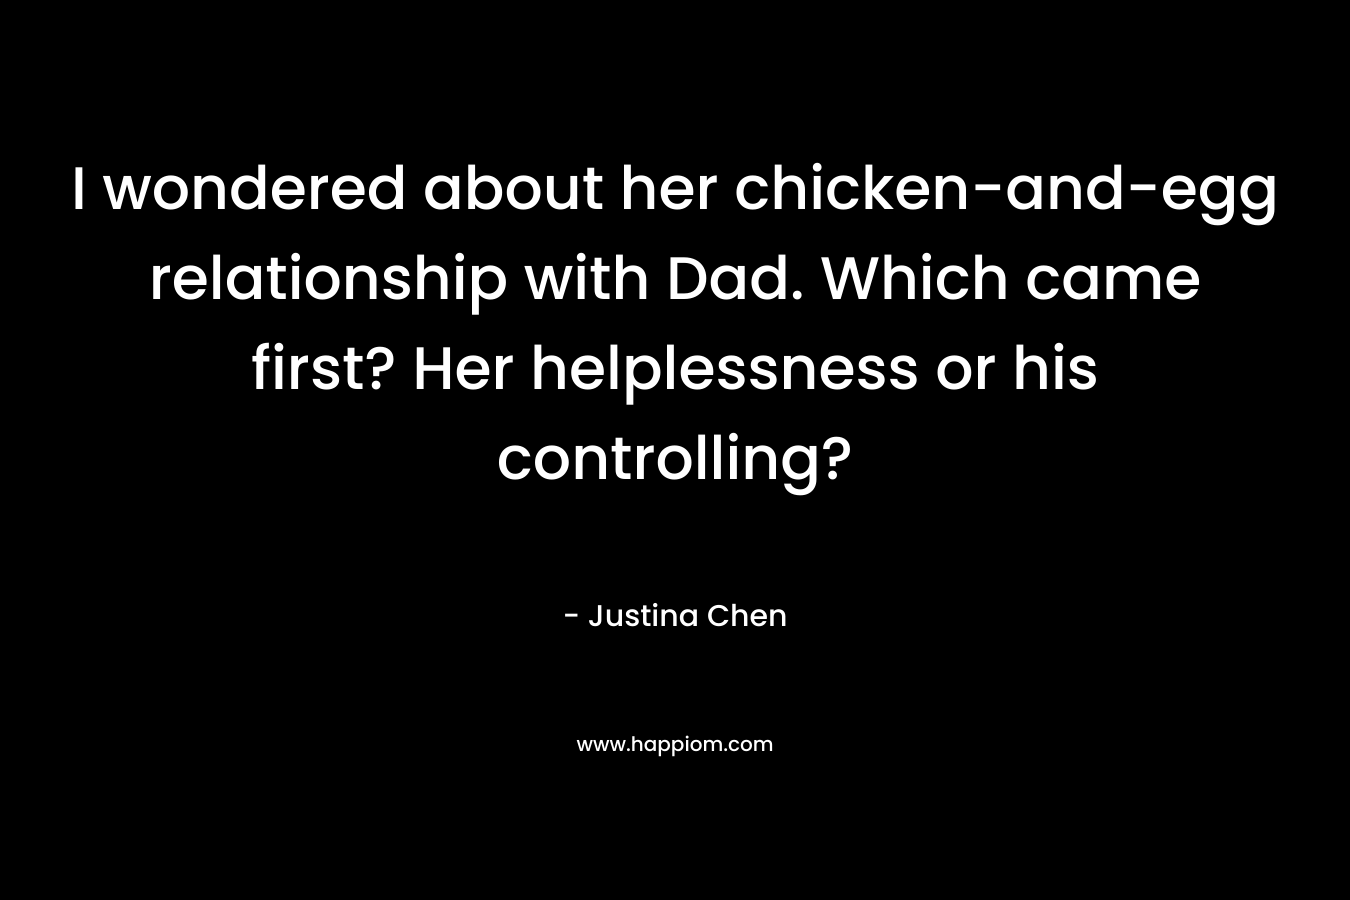 I wondered about her chicken-and-egg relationship with Dad. Which came first? Her helplessness or his controlling? – Justina Chen